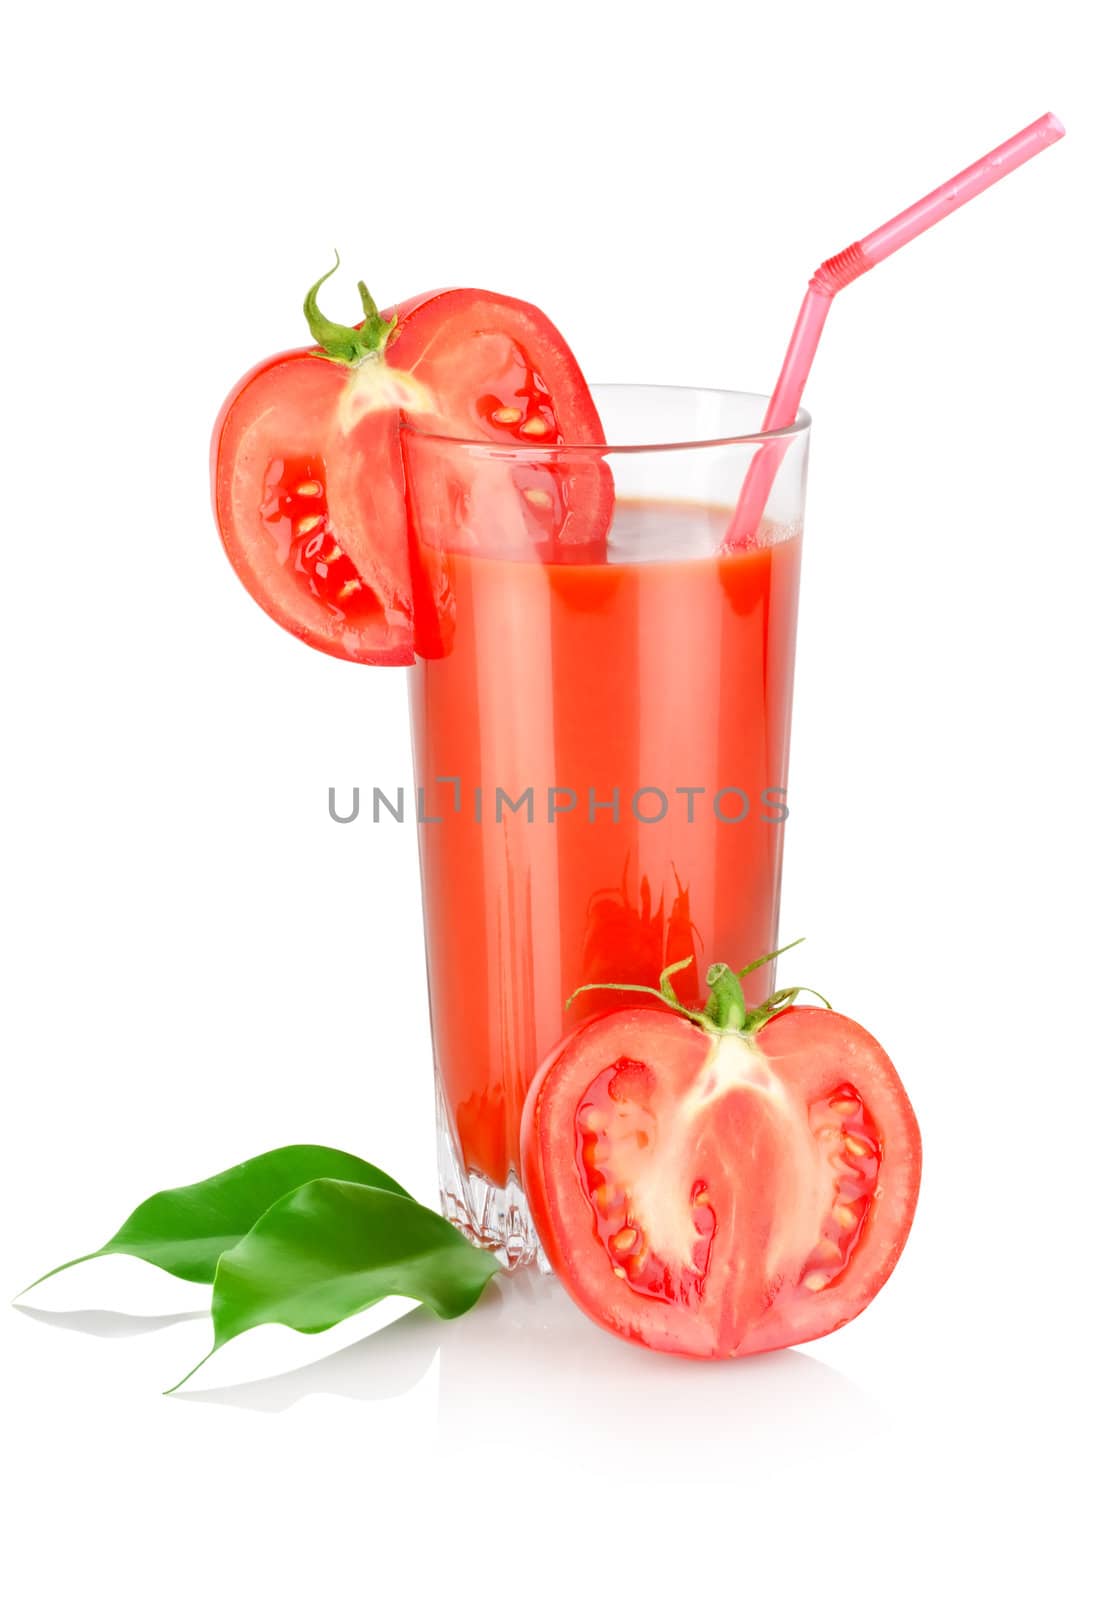 Tomato juice and tomato by Givaga